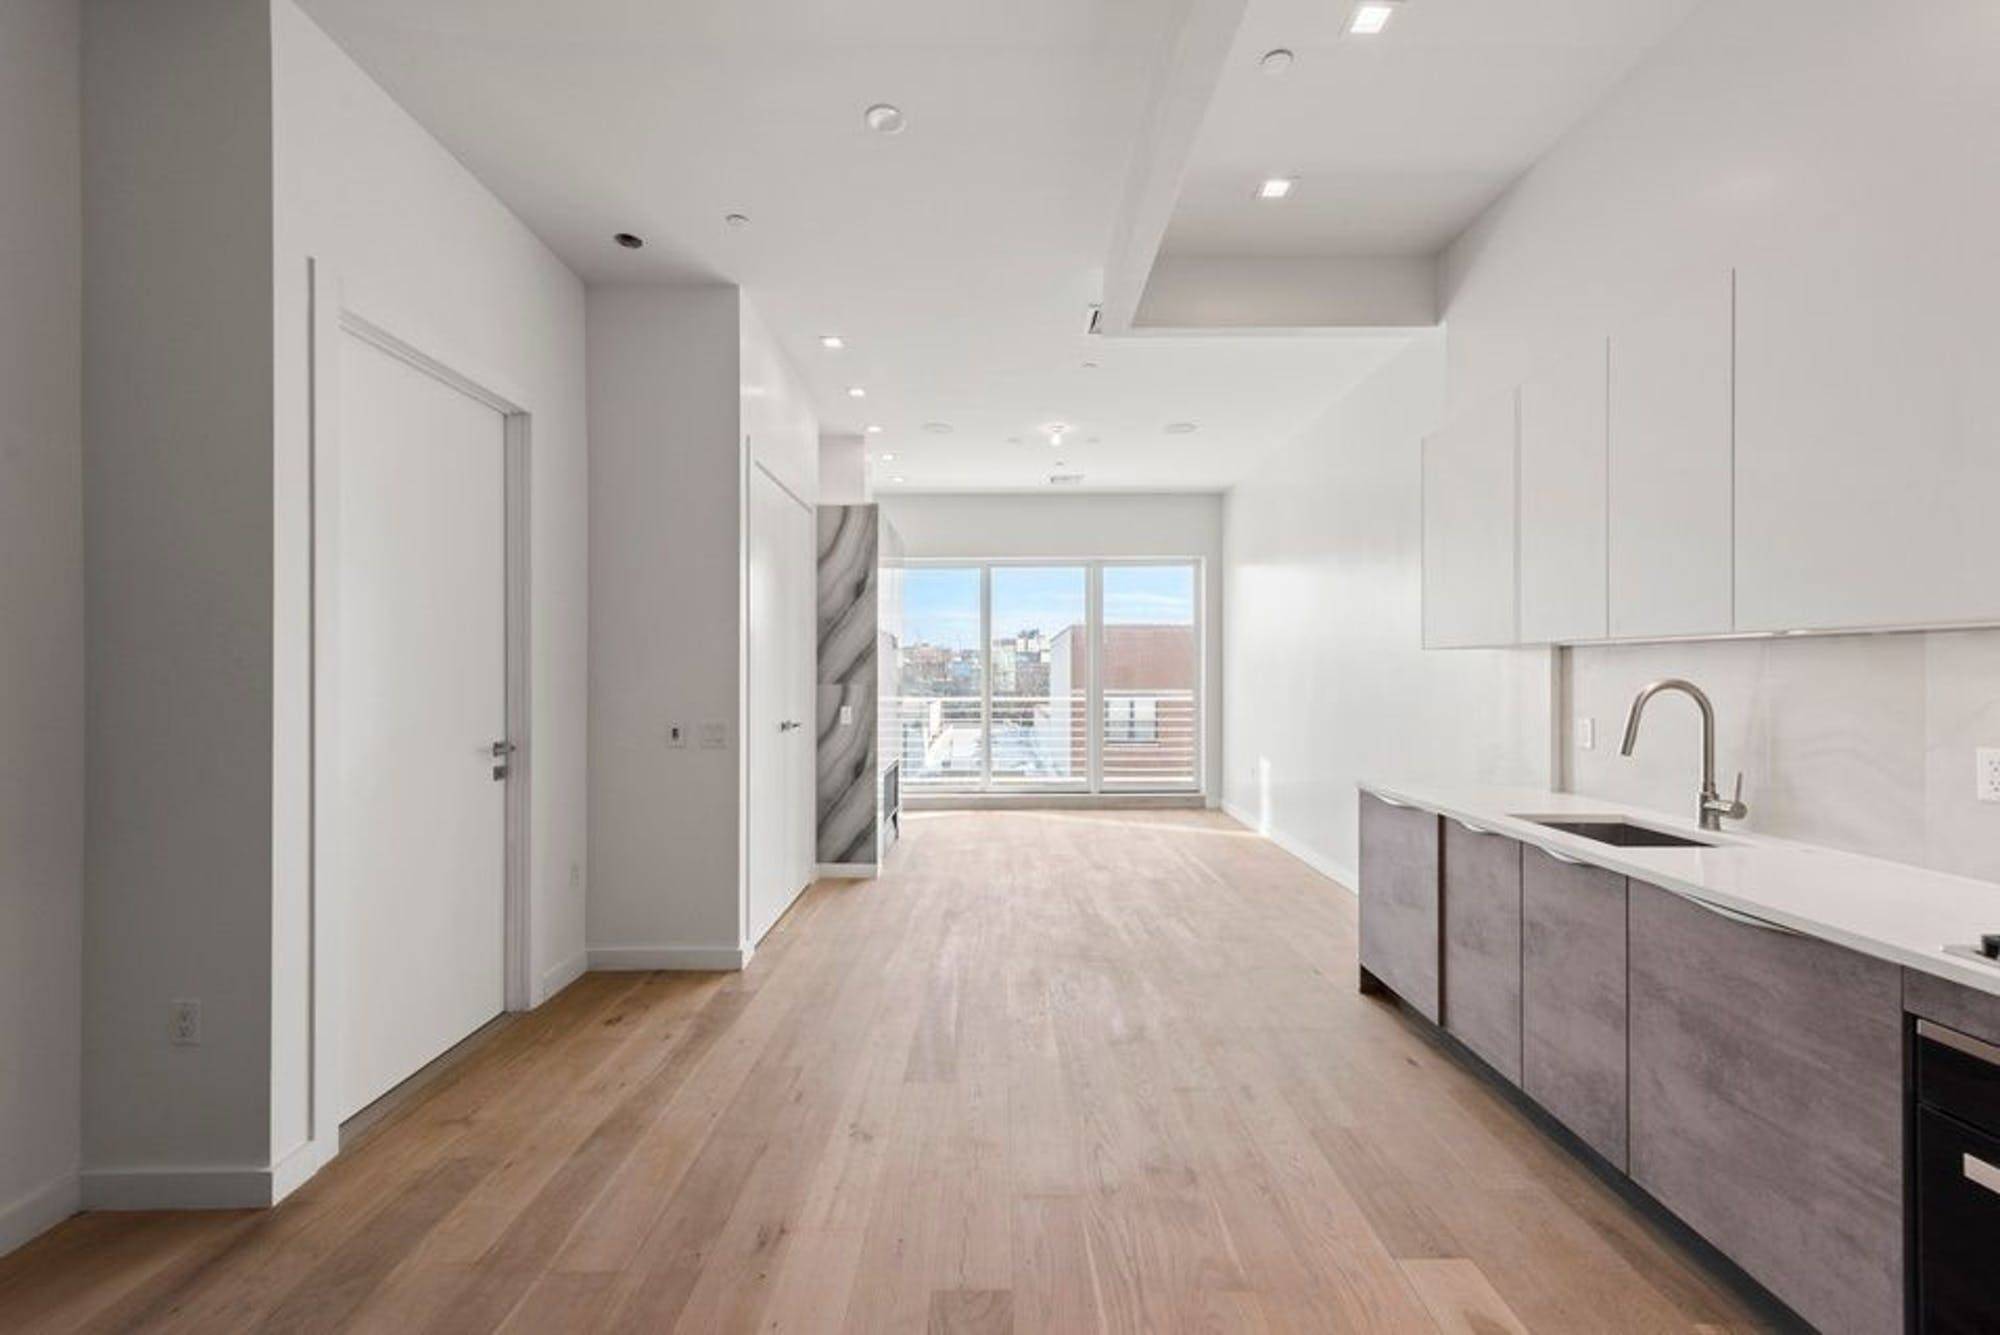 A brand new floor through condo situated a block away from McCarren Park, this contemporary 3 bedroom, 3 bathroom home blends modern fixtures and finishes with private outdoor space.